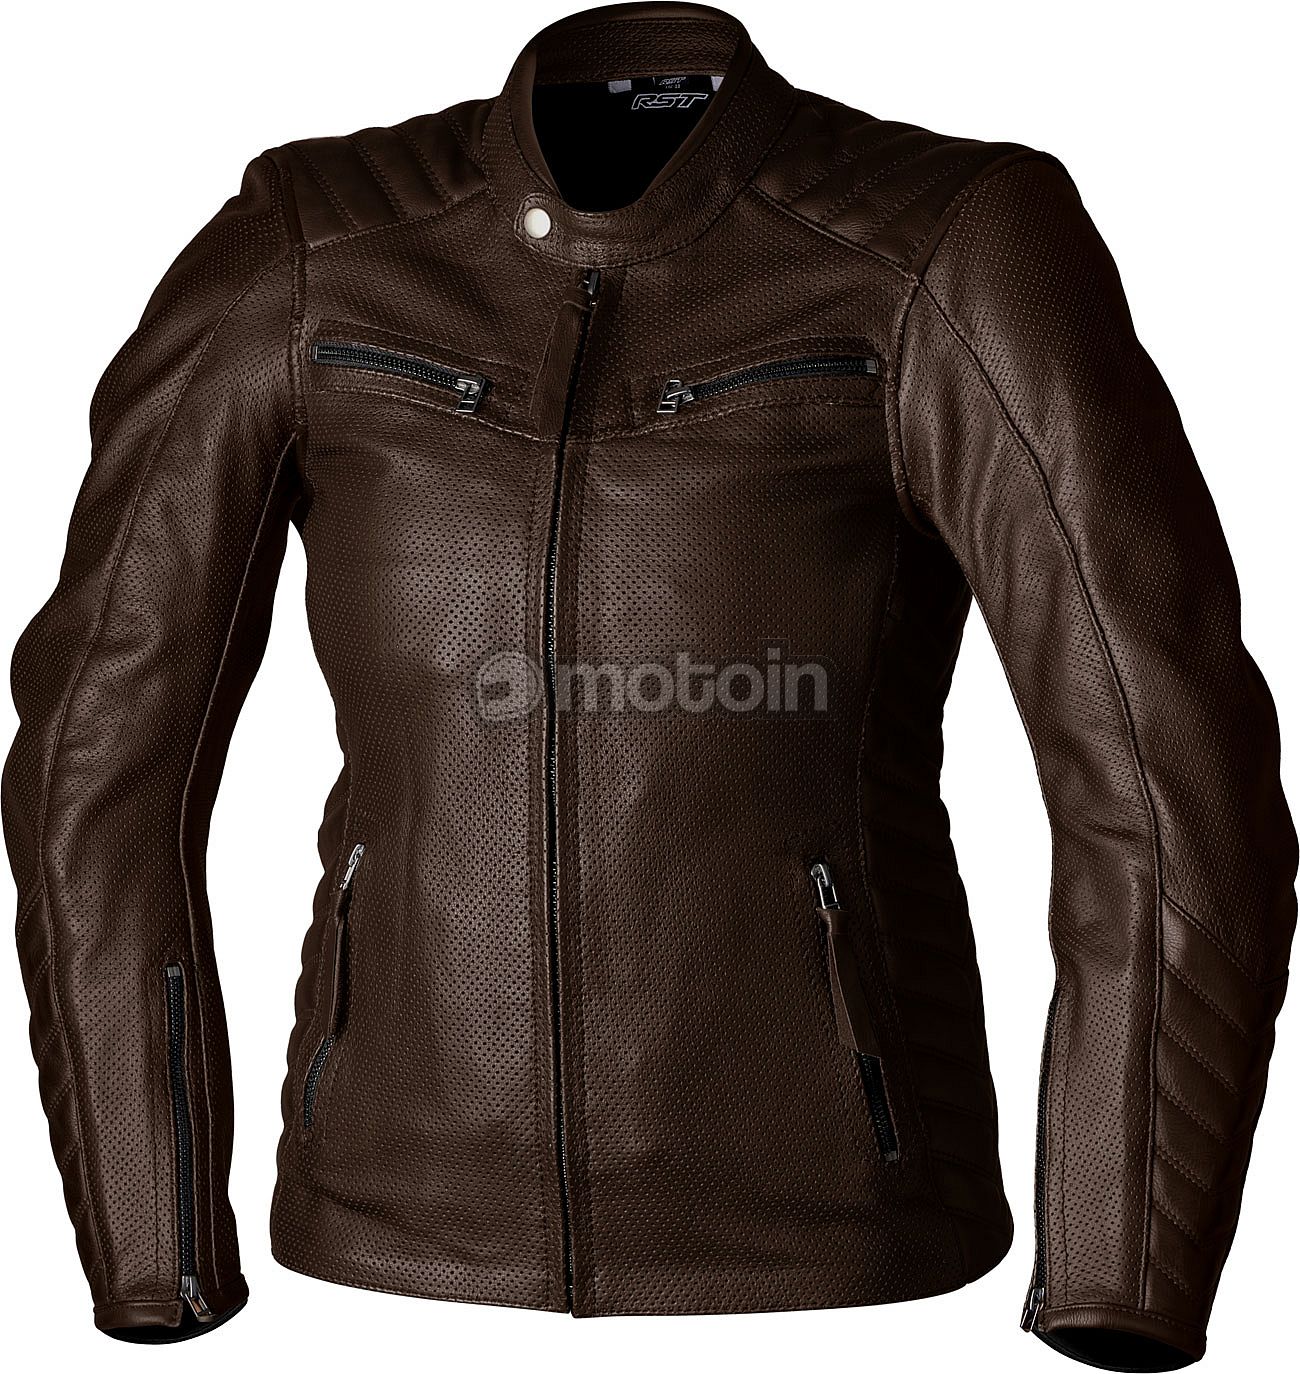 RST Roadster Air, giacca in pelle traforata donna